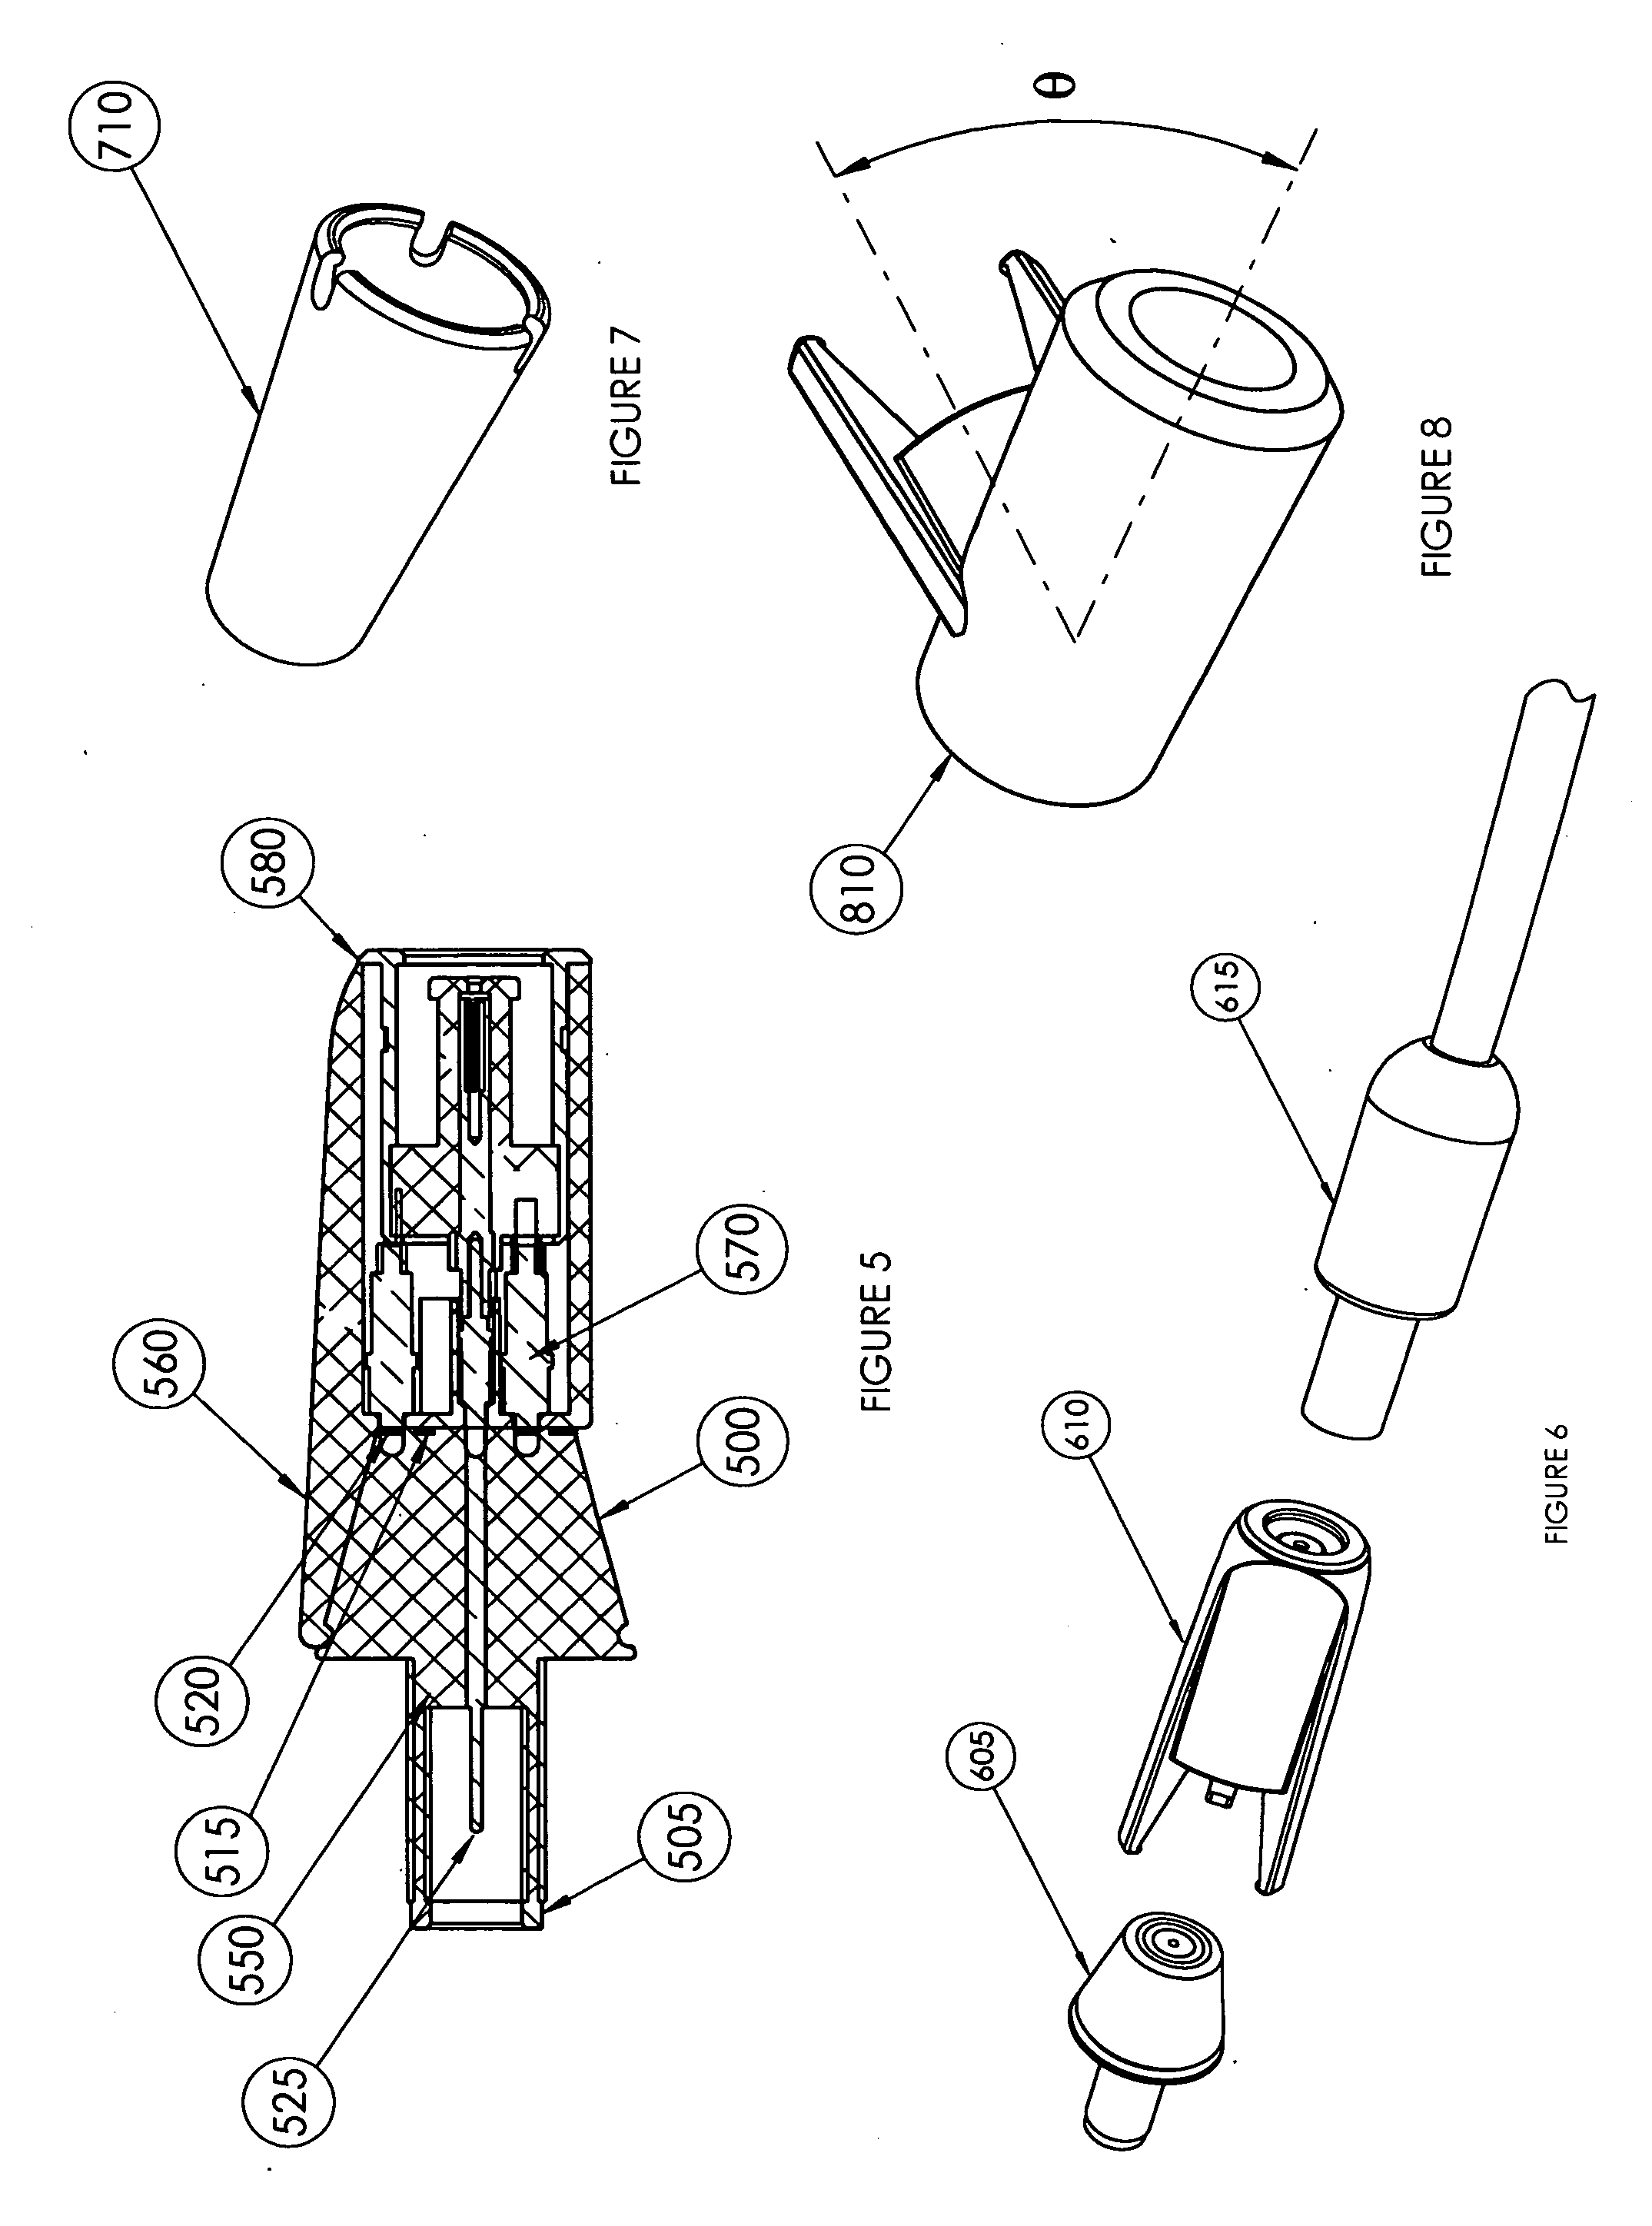 Releasable Connector System